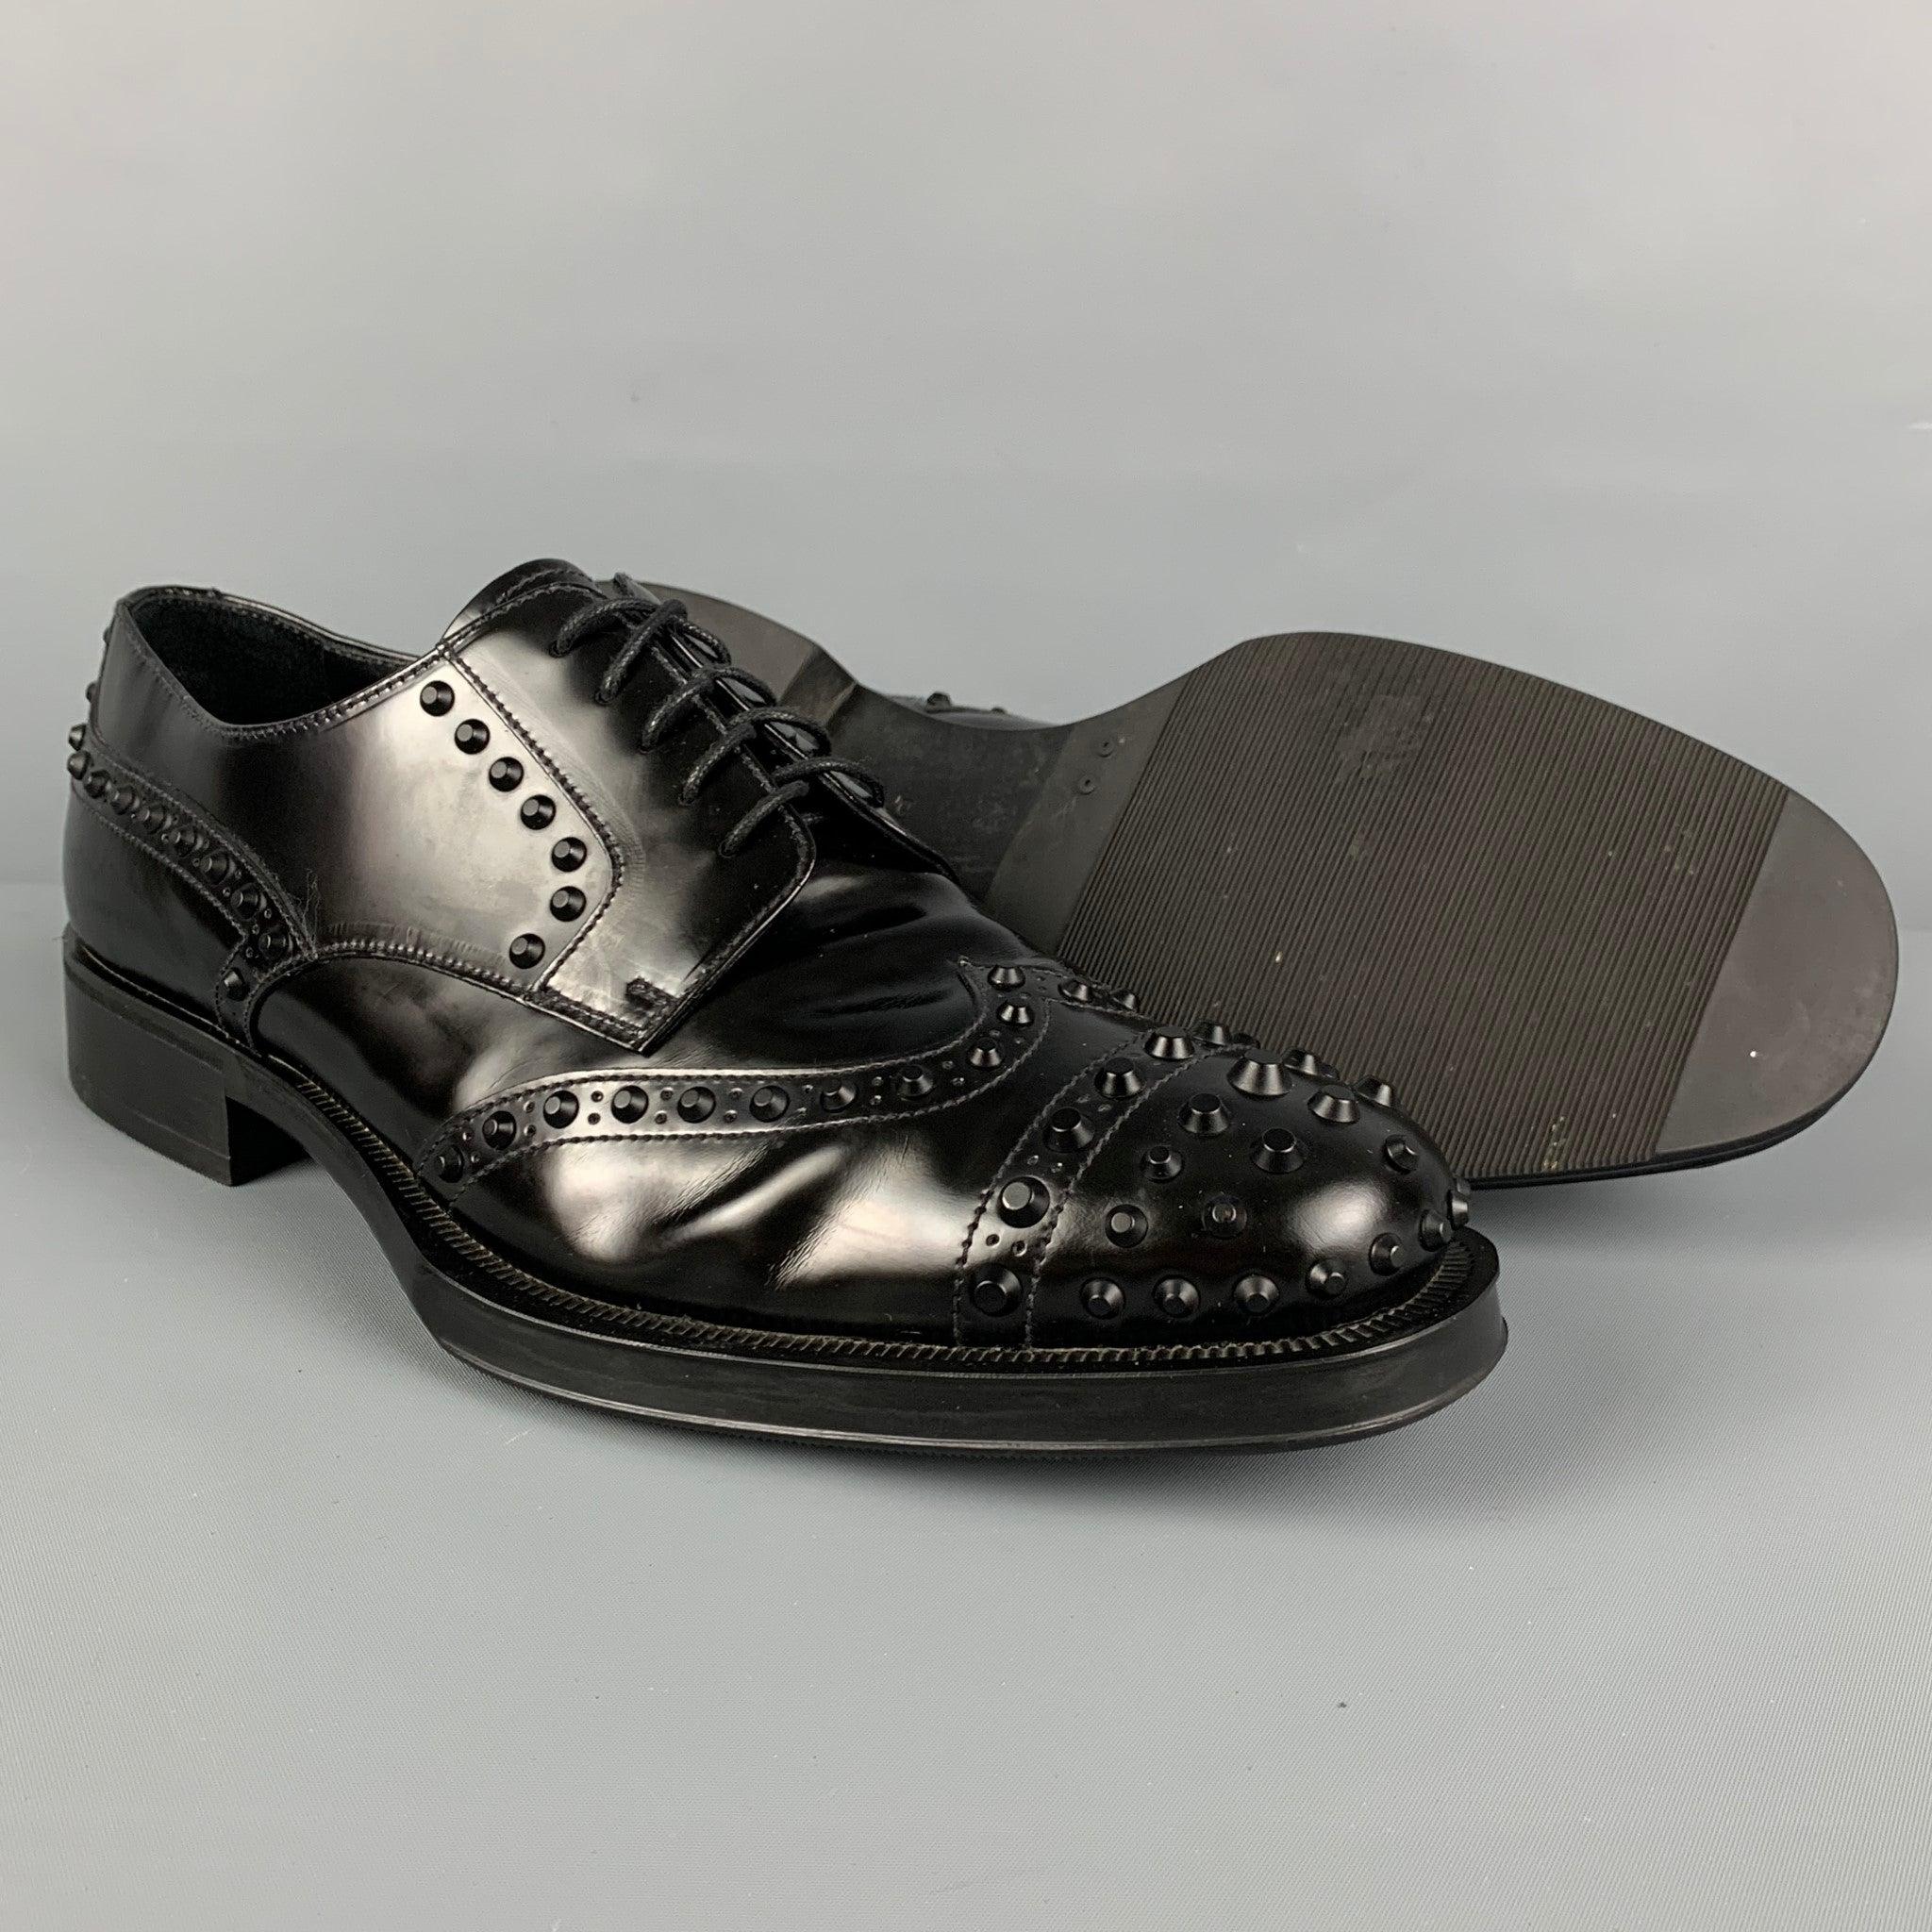 PRADA Size 10.5 Black Studded Leather Lace Up Shoes In Good Condition For Sale In San Francisco, CA